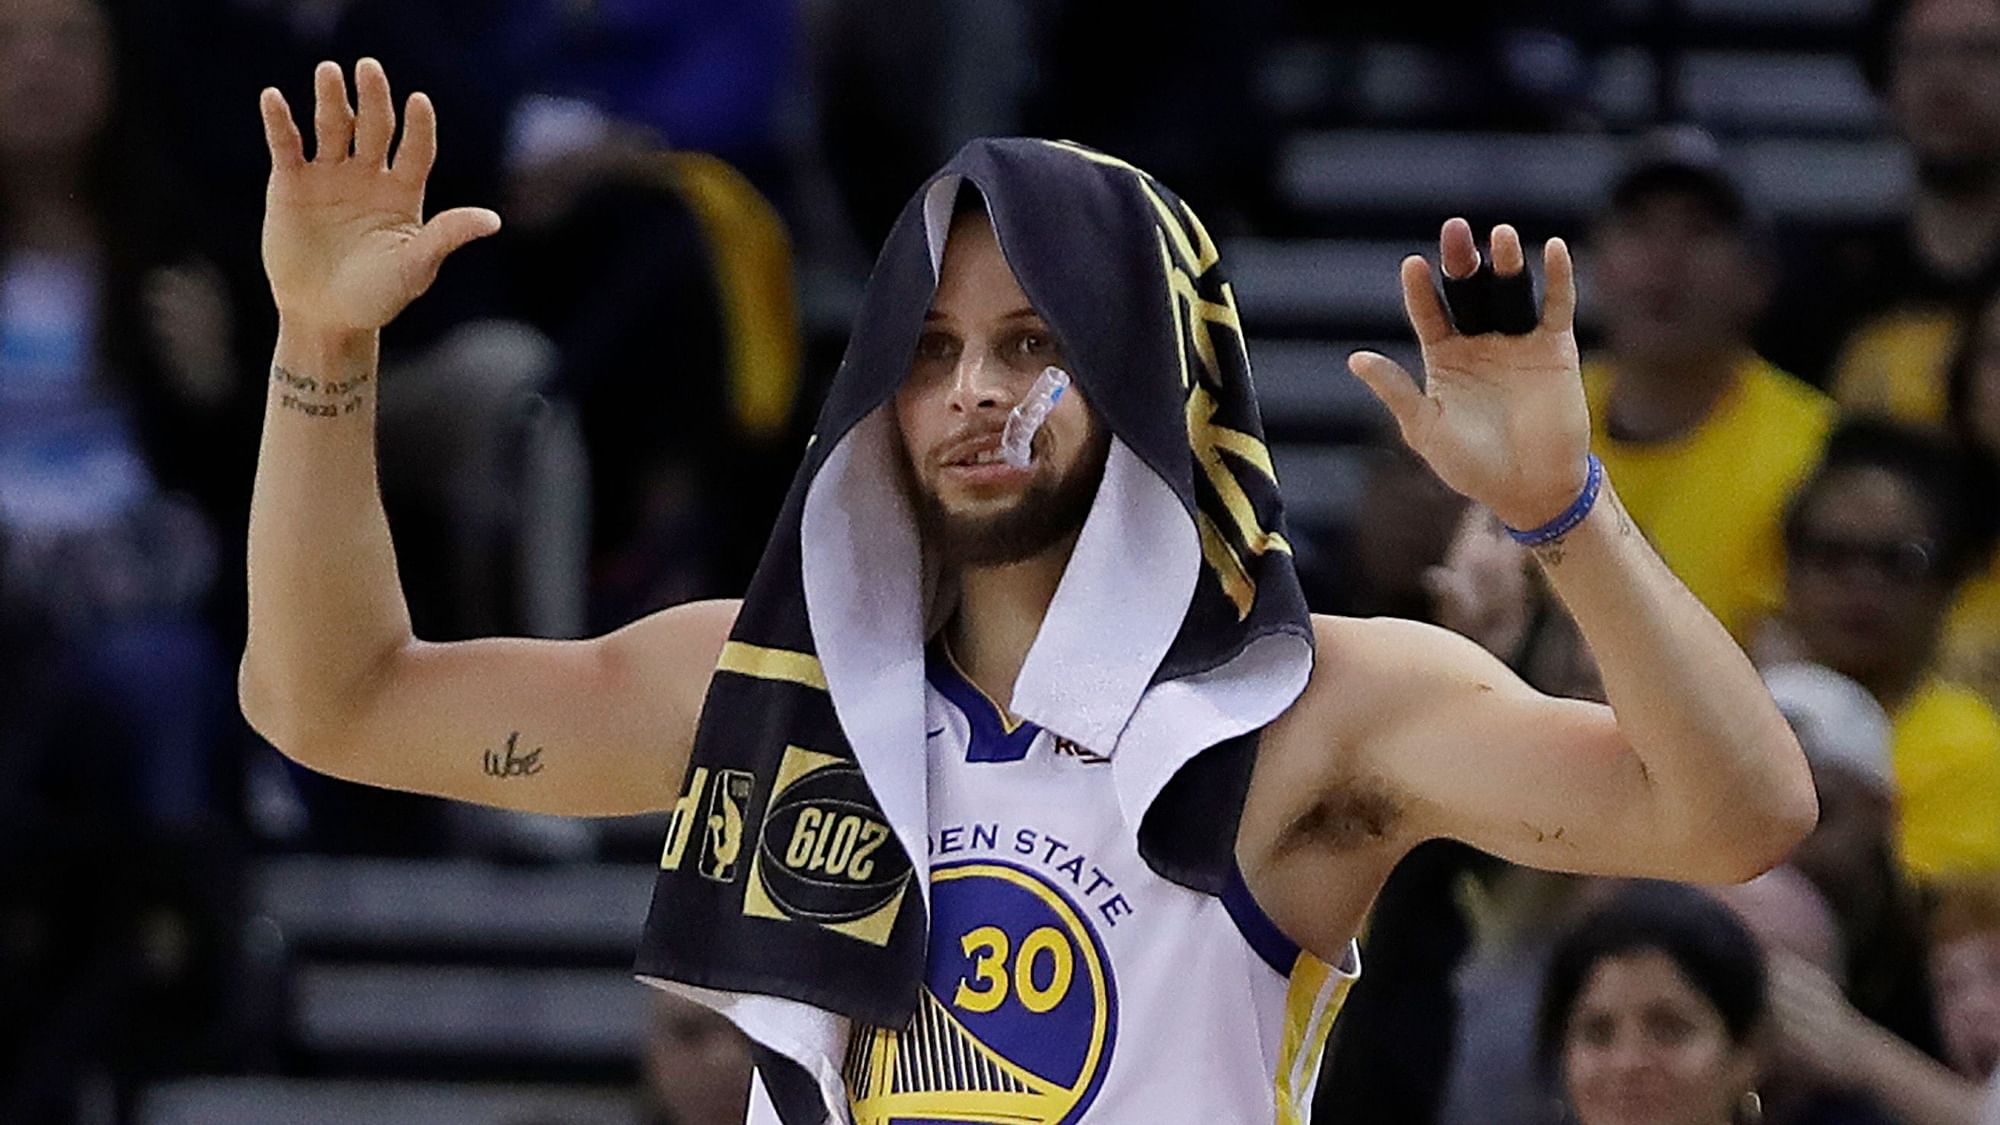 Golden State Warriors’ Stephen Curry celebrates a score while on the bench during the second half of Game 1 of the NBA basketball playoffs Western Conference finals against the Portland Trail Blazers Tuesday, May 14, 2019